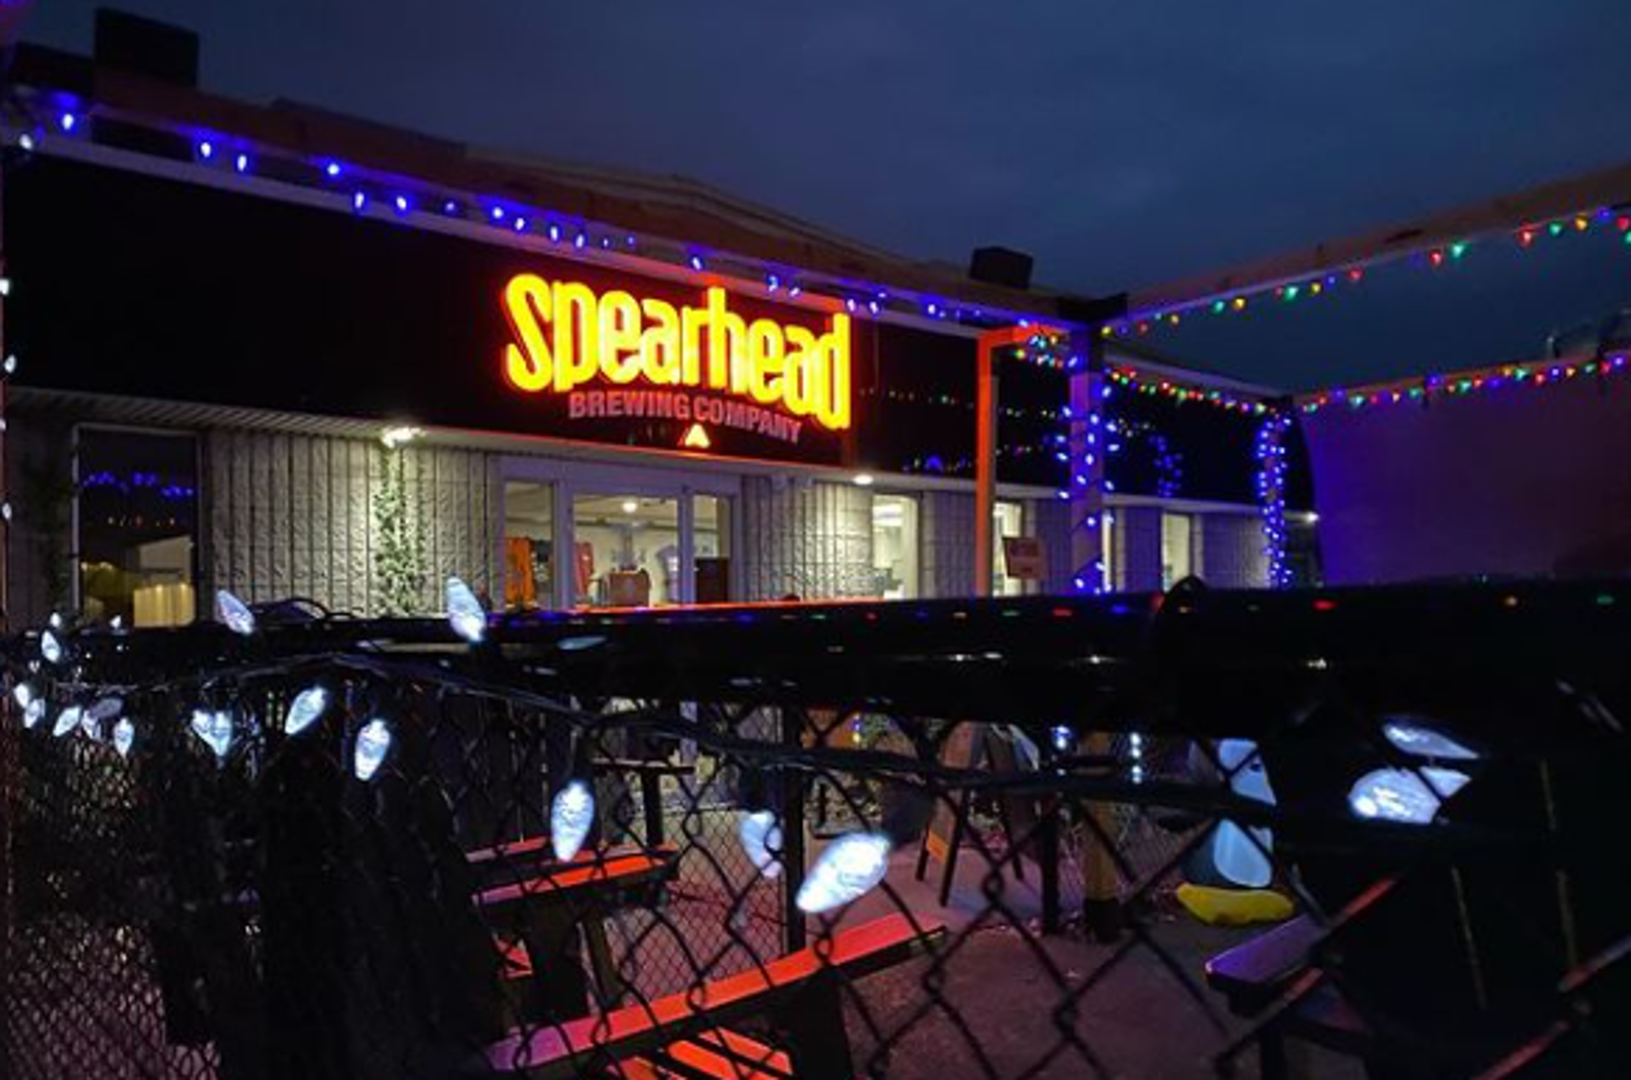 Spearhead Brewing Co. Restaurant - Picture